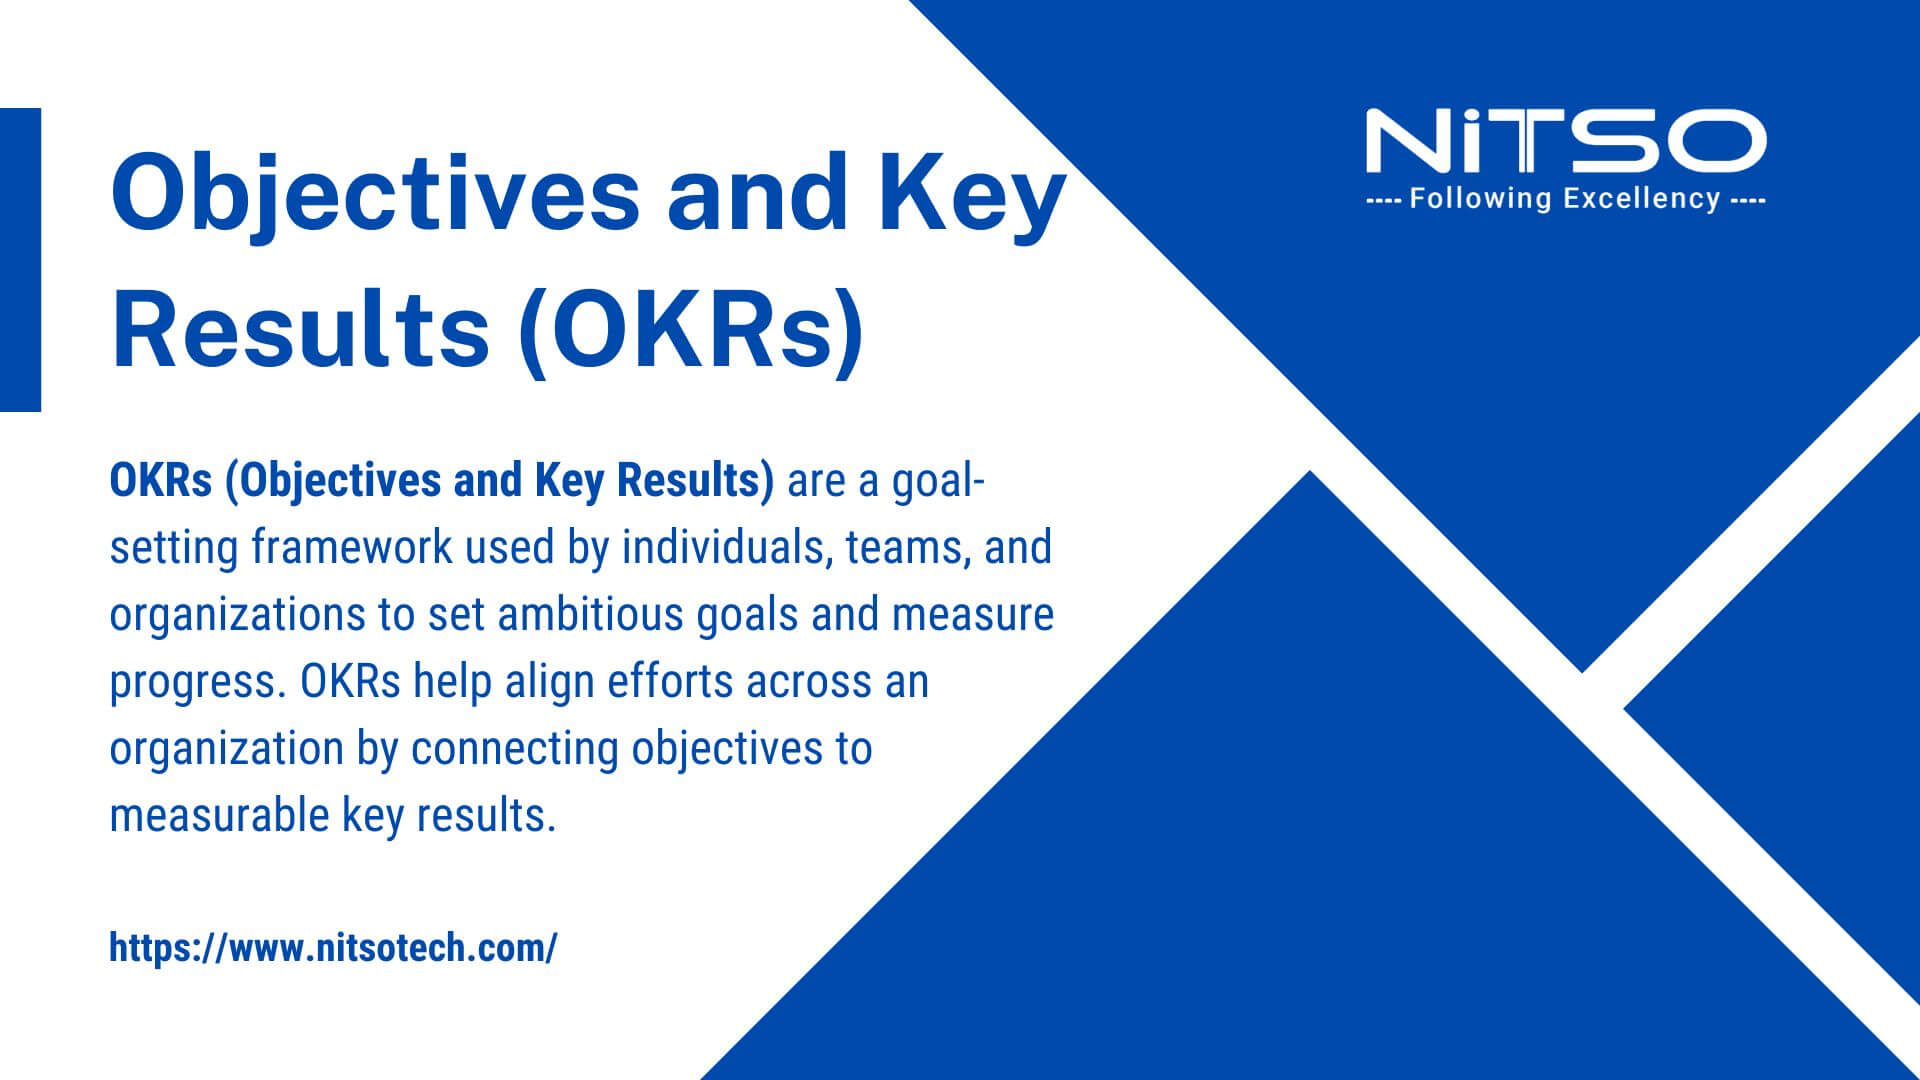 What is Objectives and Key Results (OKRs)